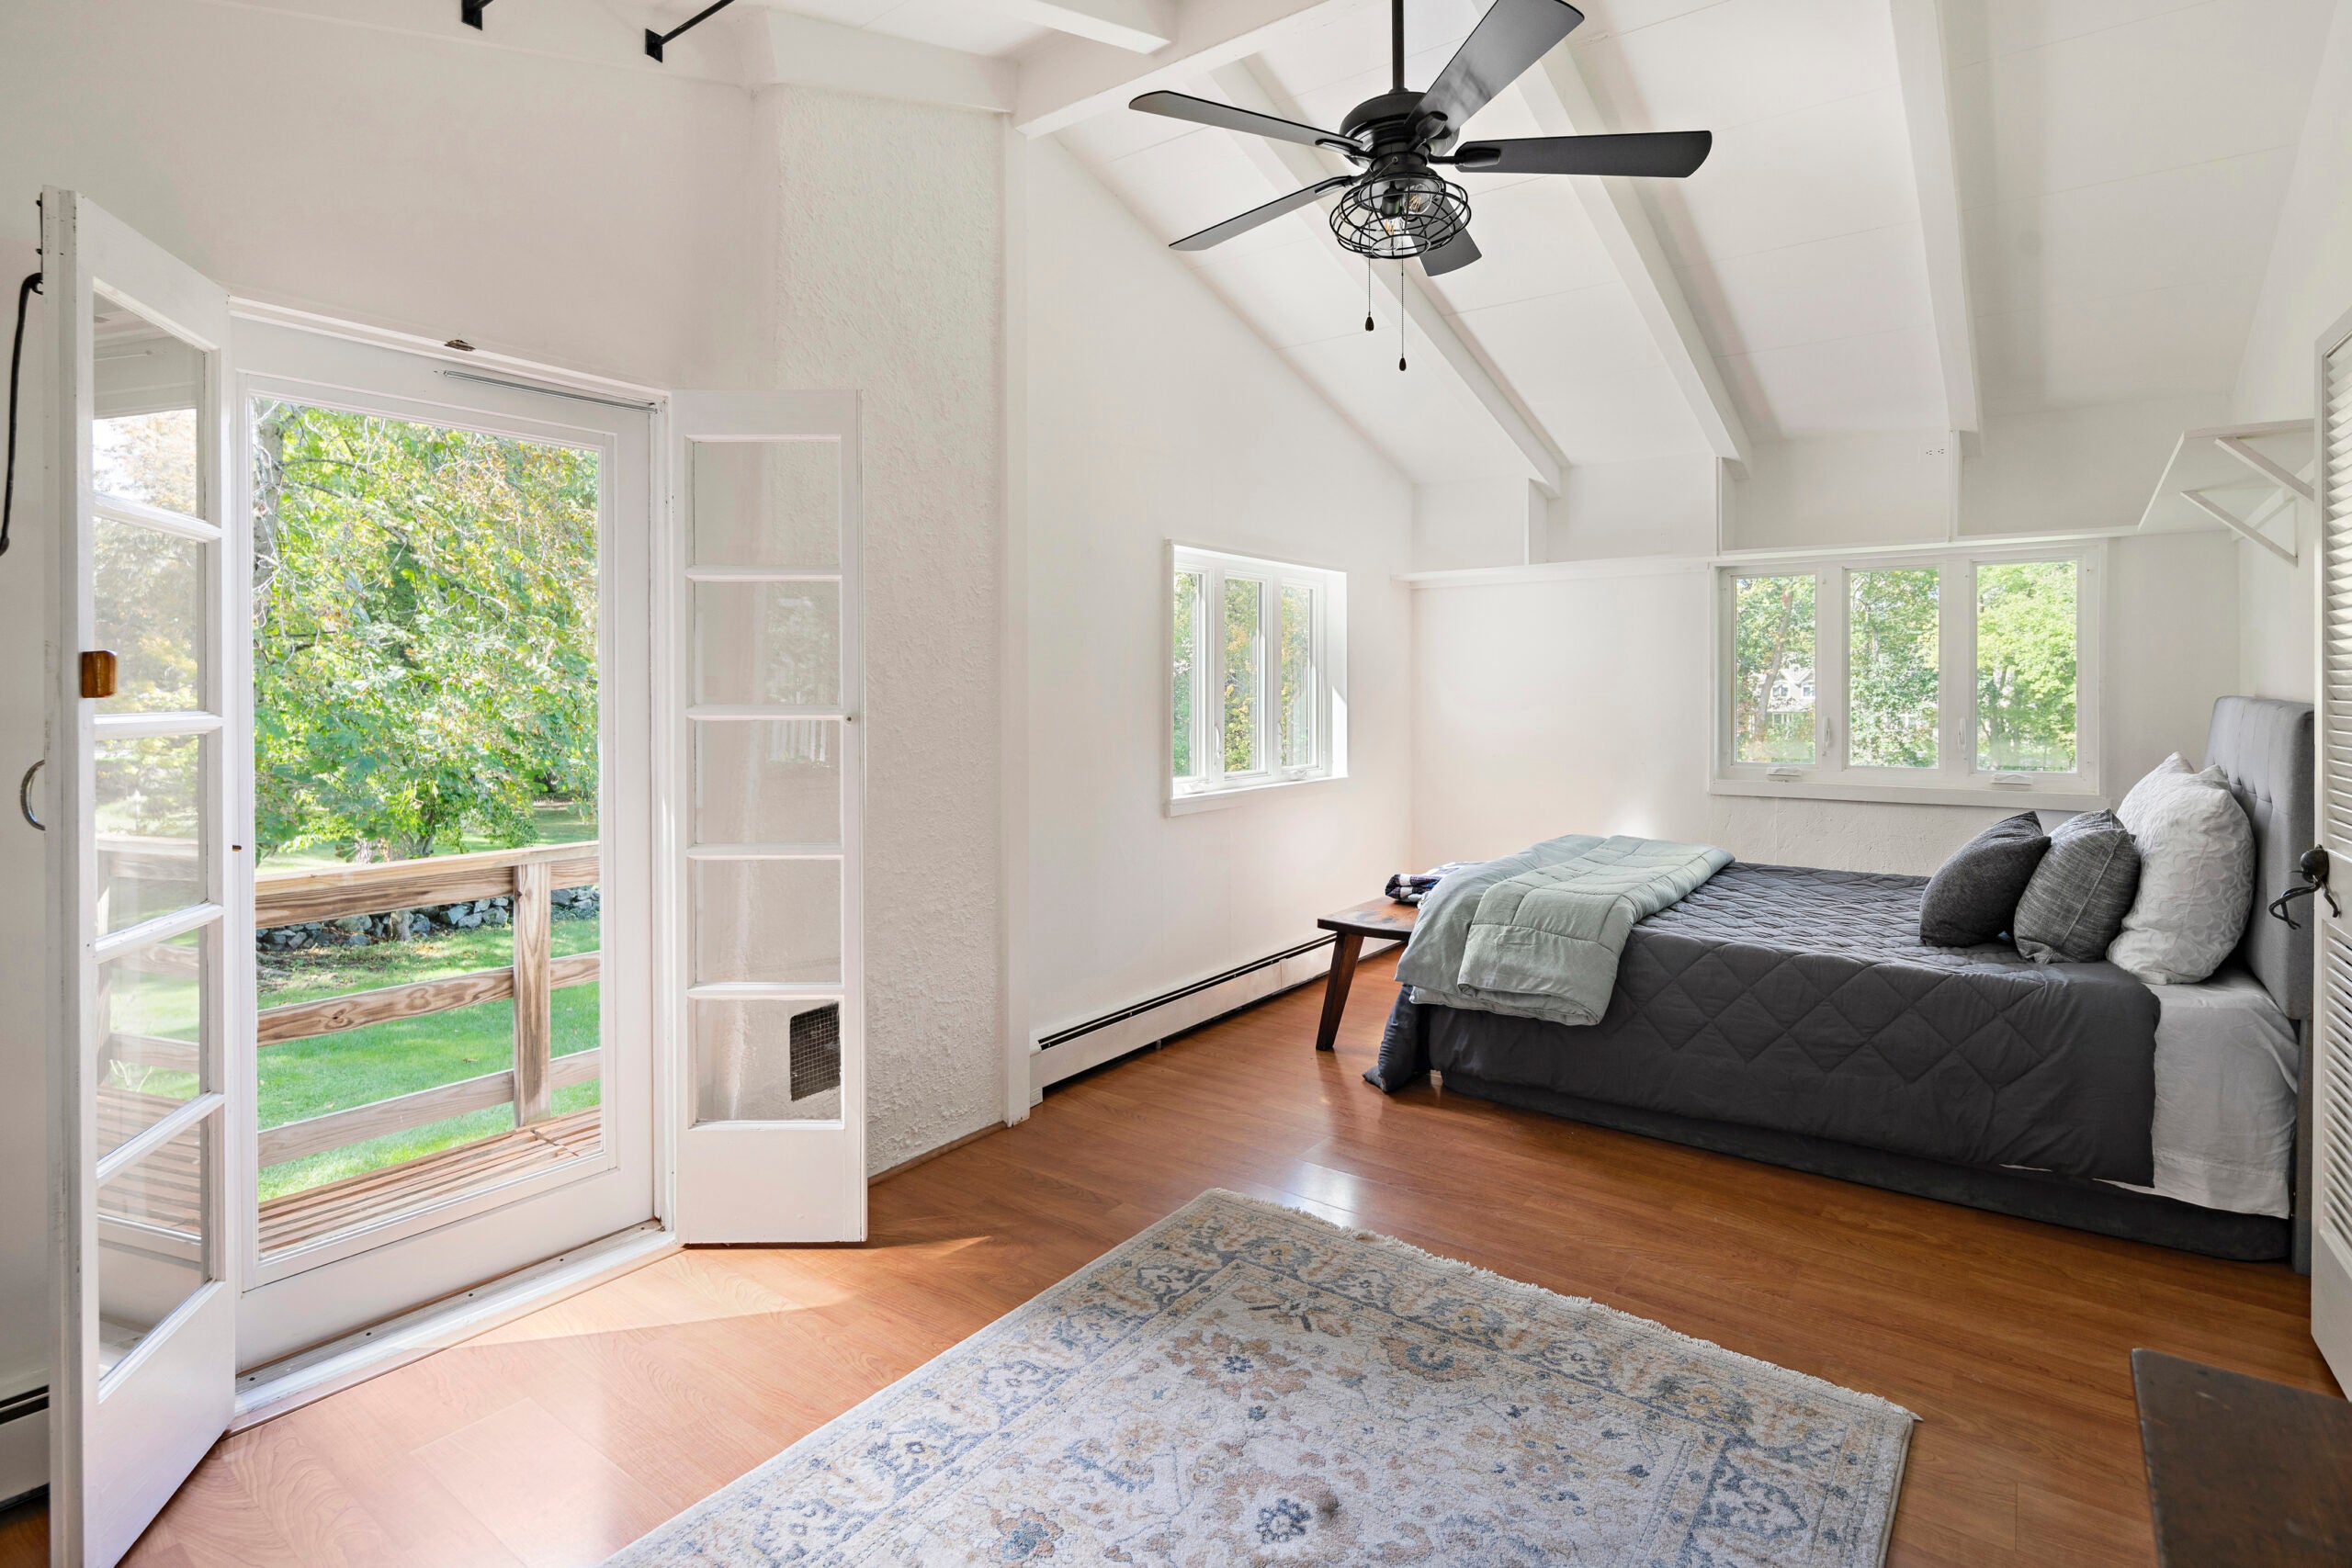 A bedroom with a ceiling fan, exposed beams, and French doors to a deck.